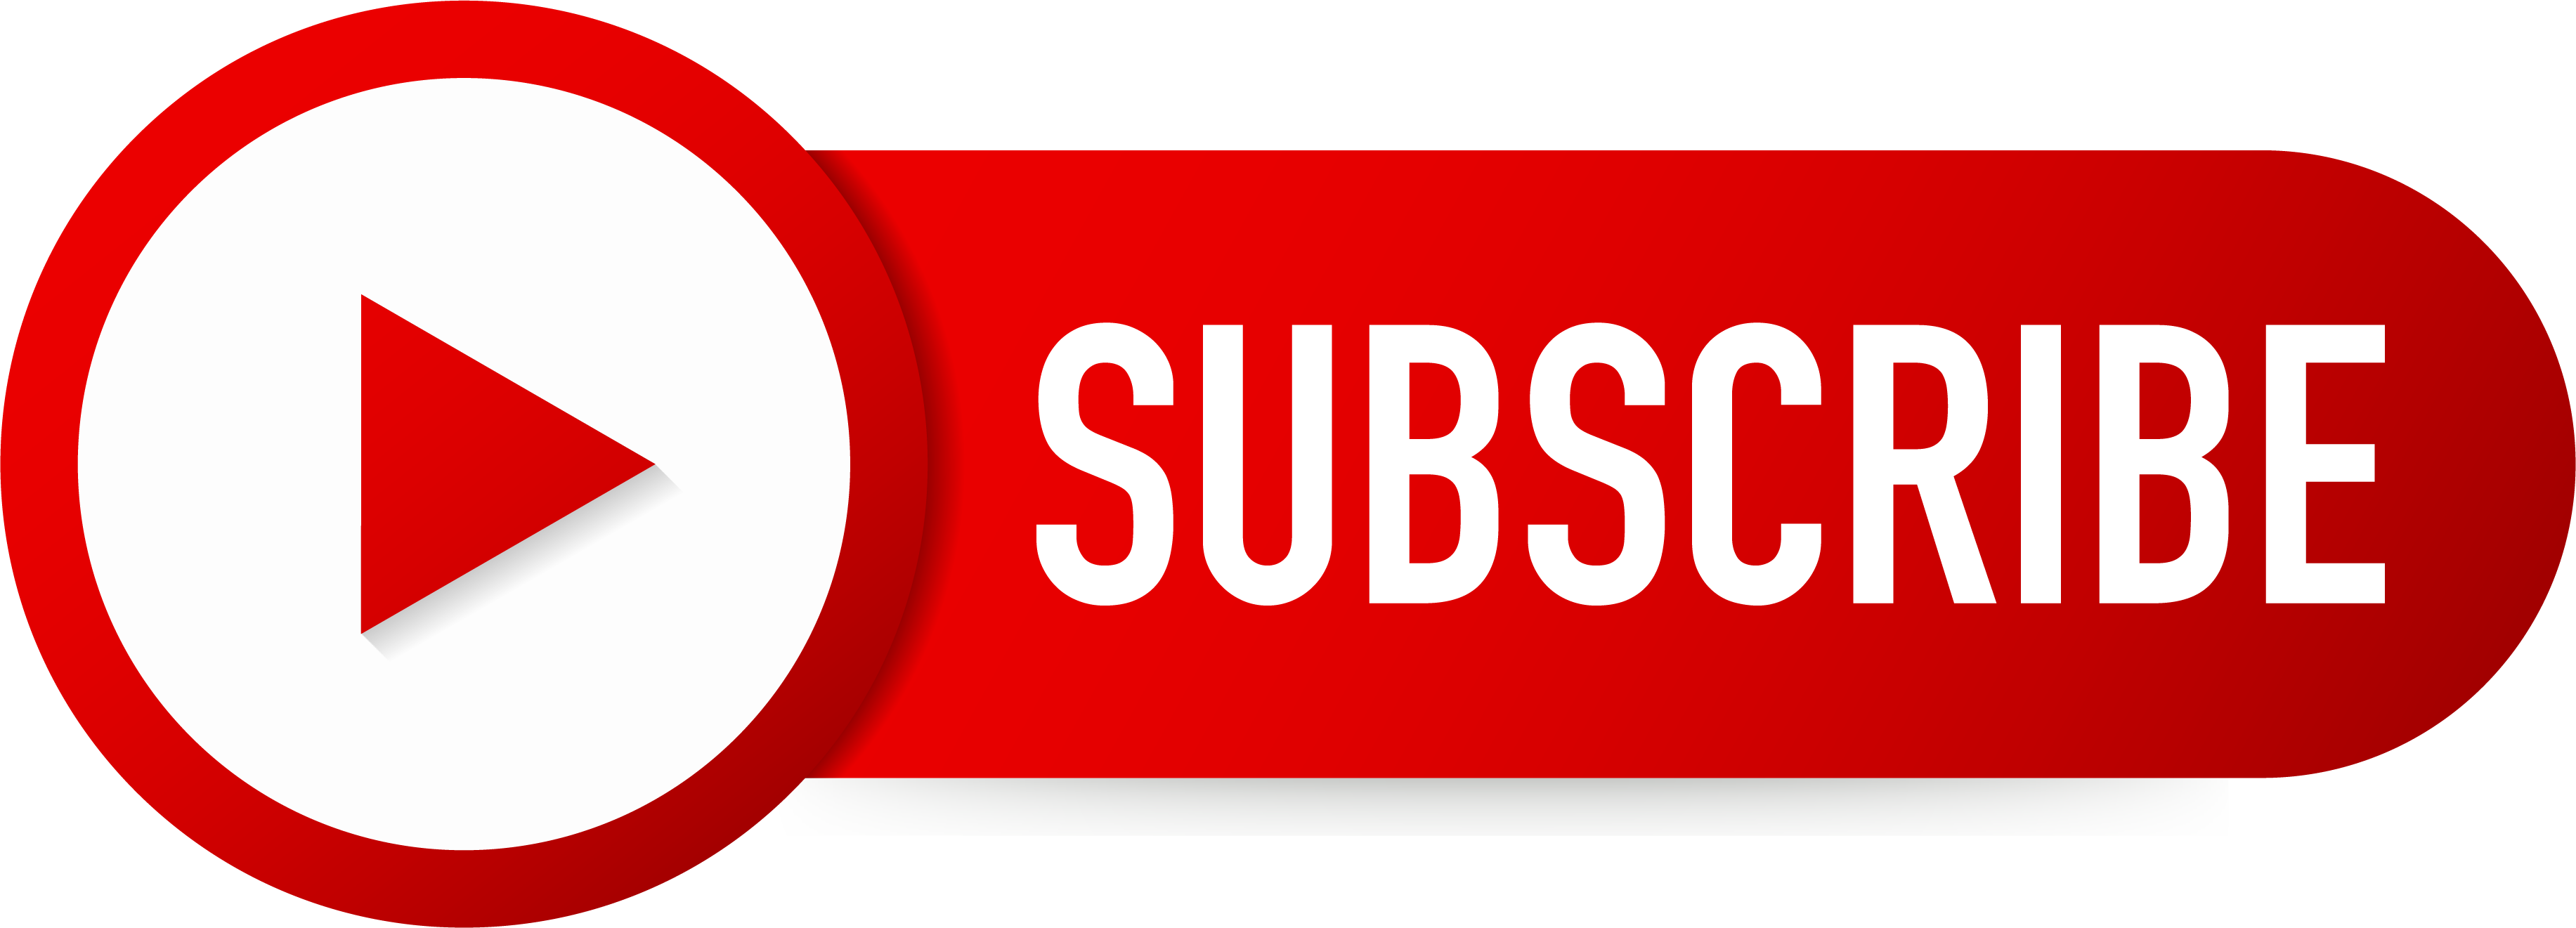 Youtube Subscribe Button Png Hd Image Sexiz Pix